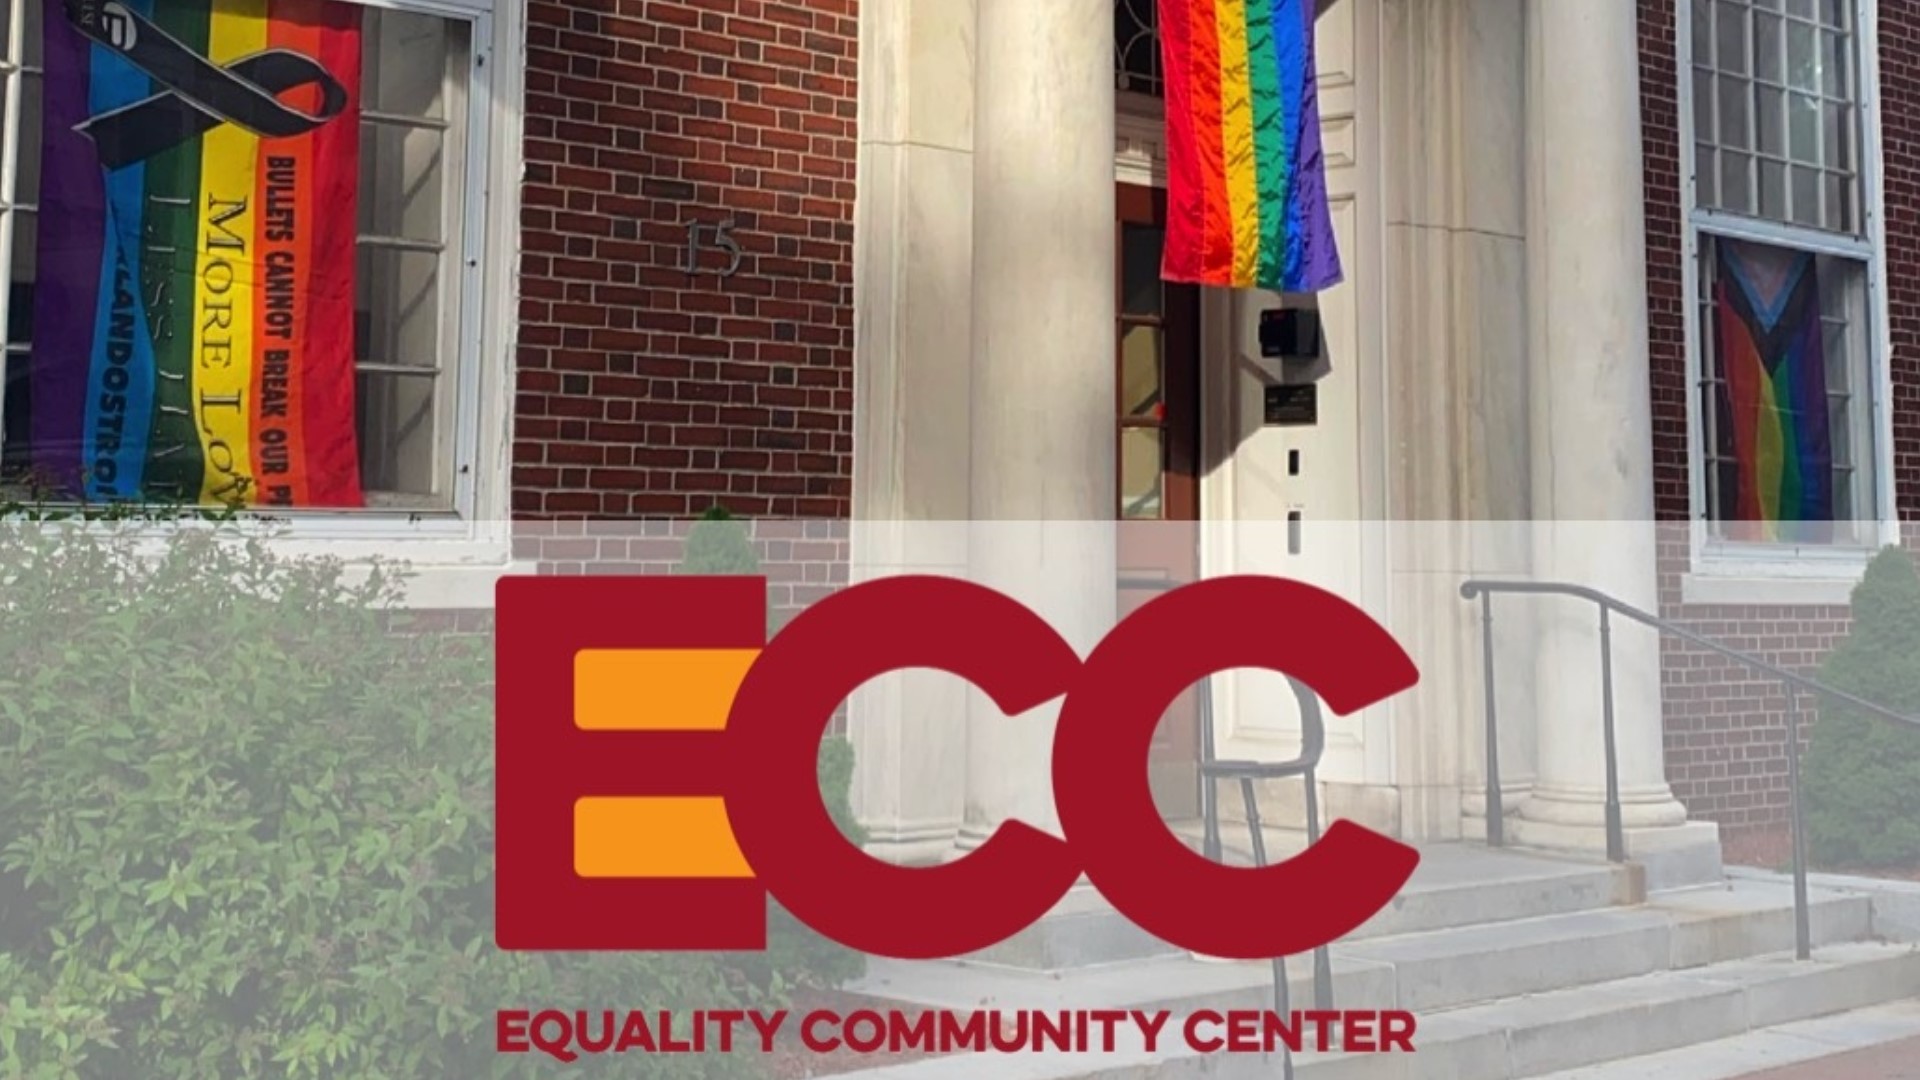 Portland’s Equality Community Center to host grand opening on Oct. 16